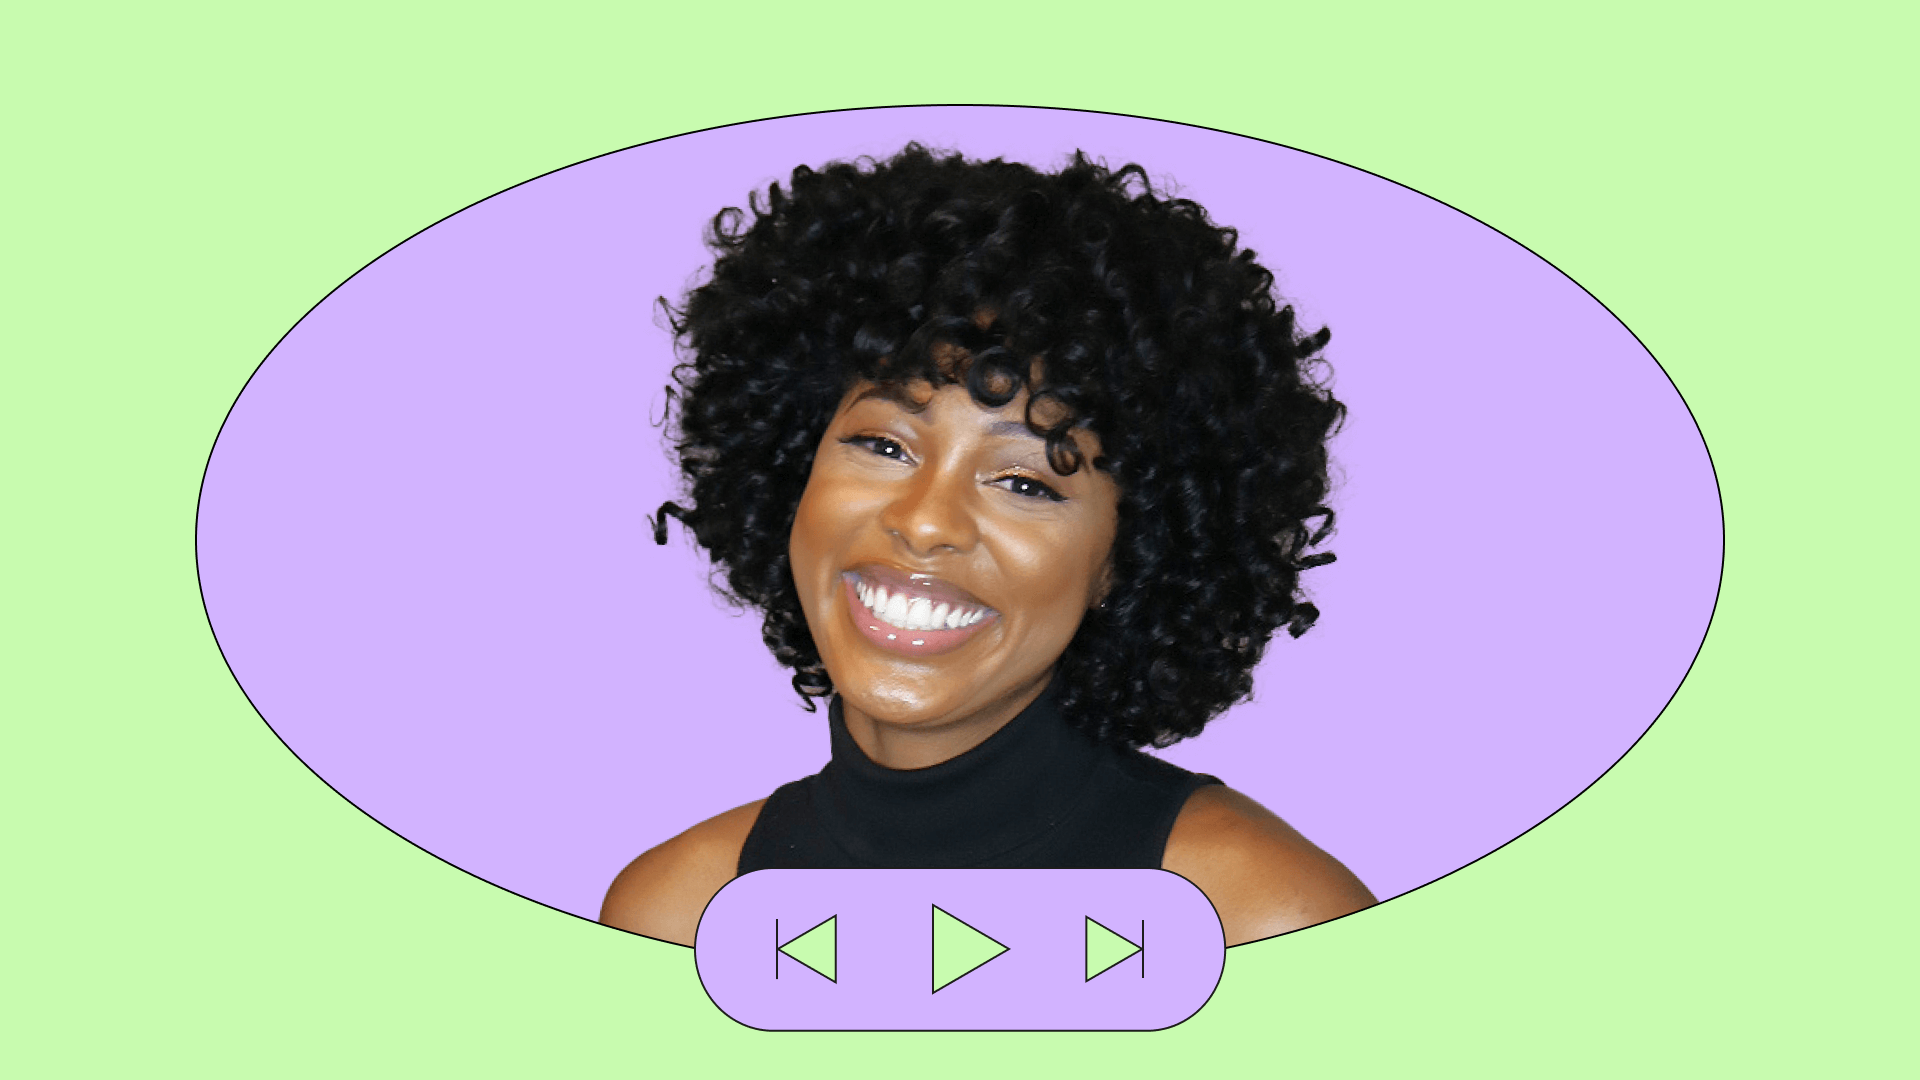 Image of woman with curly hair smiling as an example of how to convert social content into commerce. 